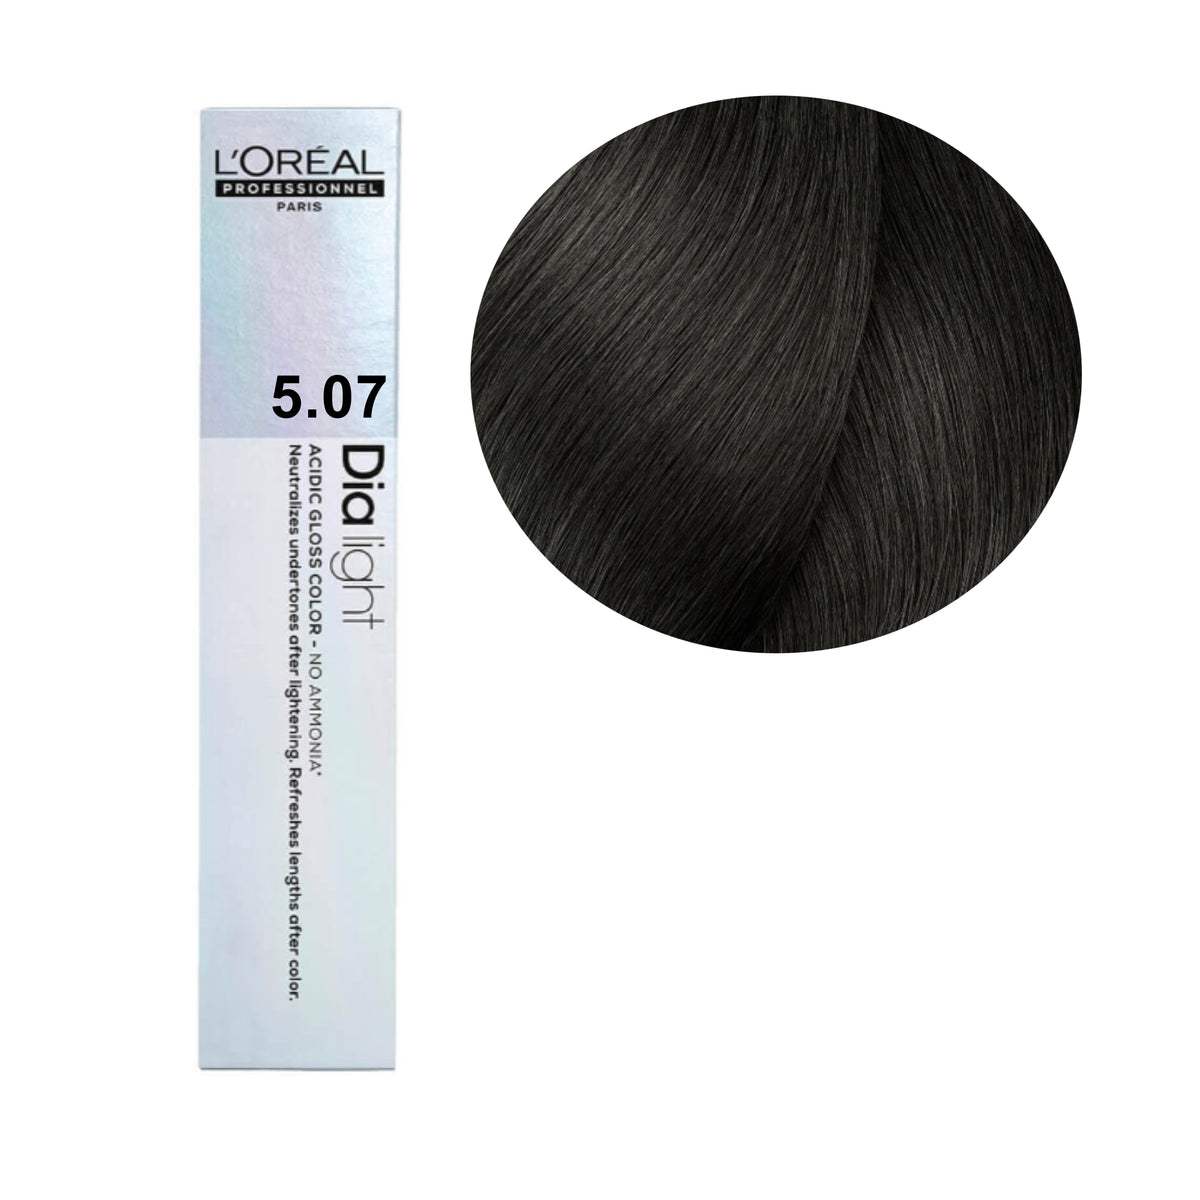 a tube of dark brown hair with a white background